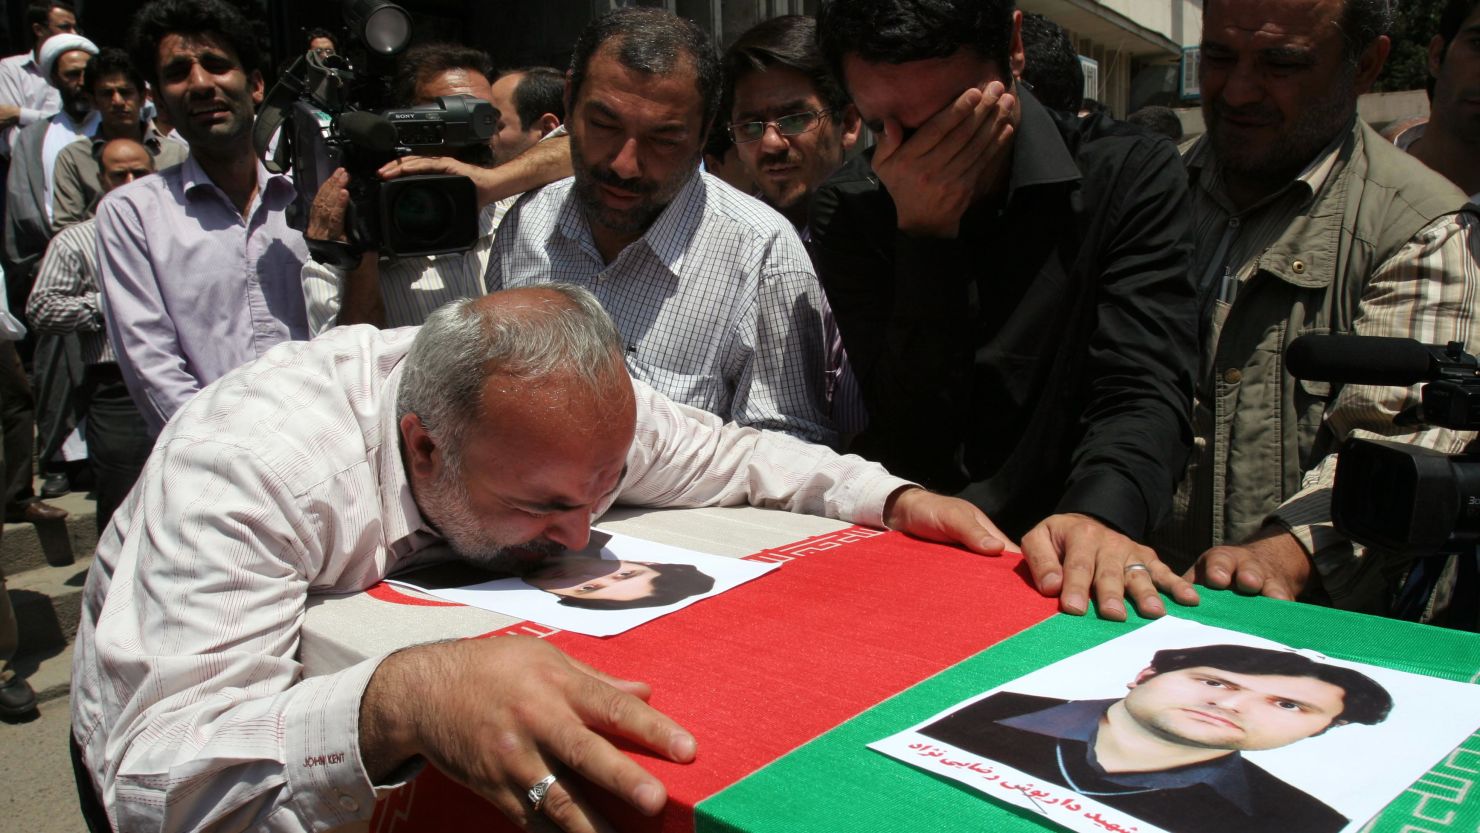 Mourners at the funeral of 35-year-old Daryoush Rezaie, the Iranian nuclear scientist who was shot dead in 2011.